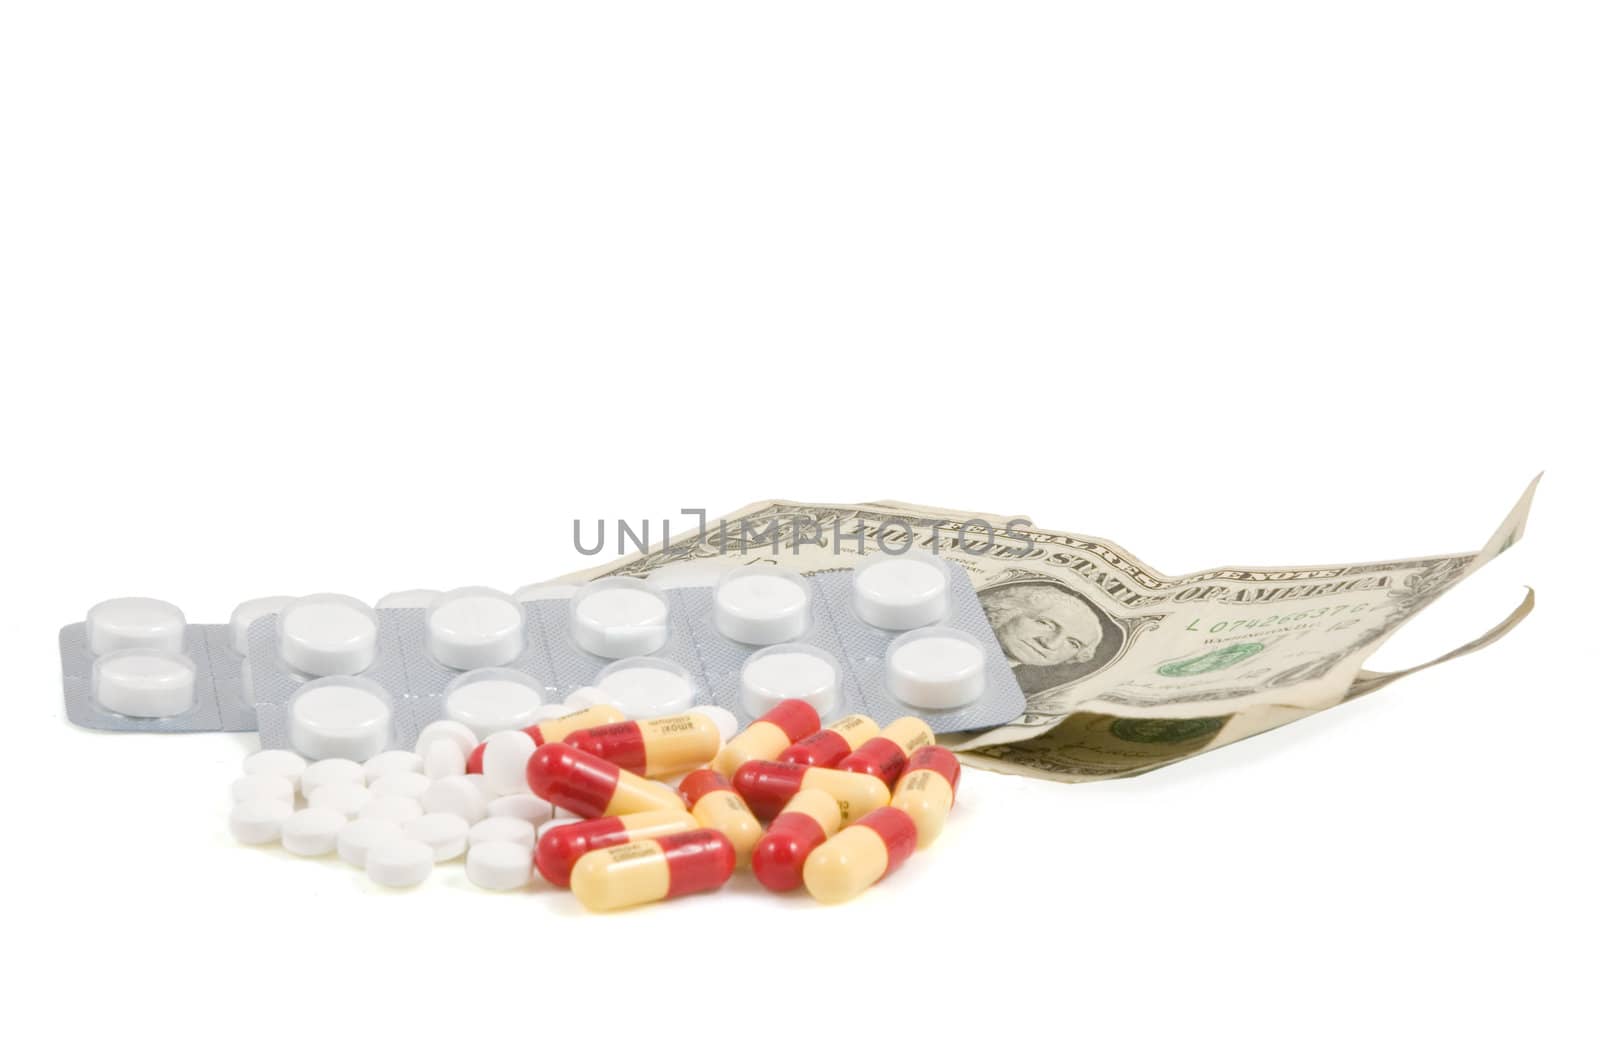 Pills with american dollar on a white background by ladyminnie